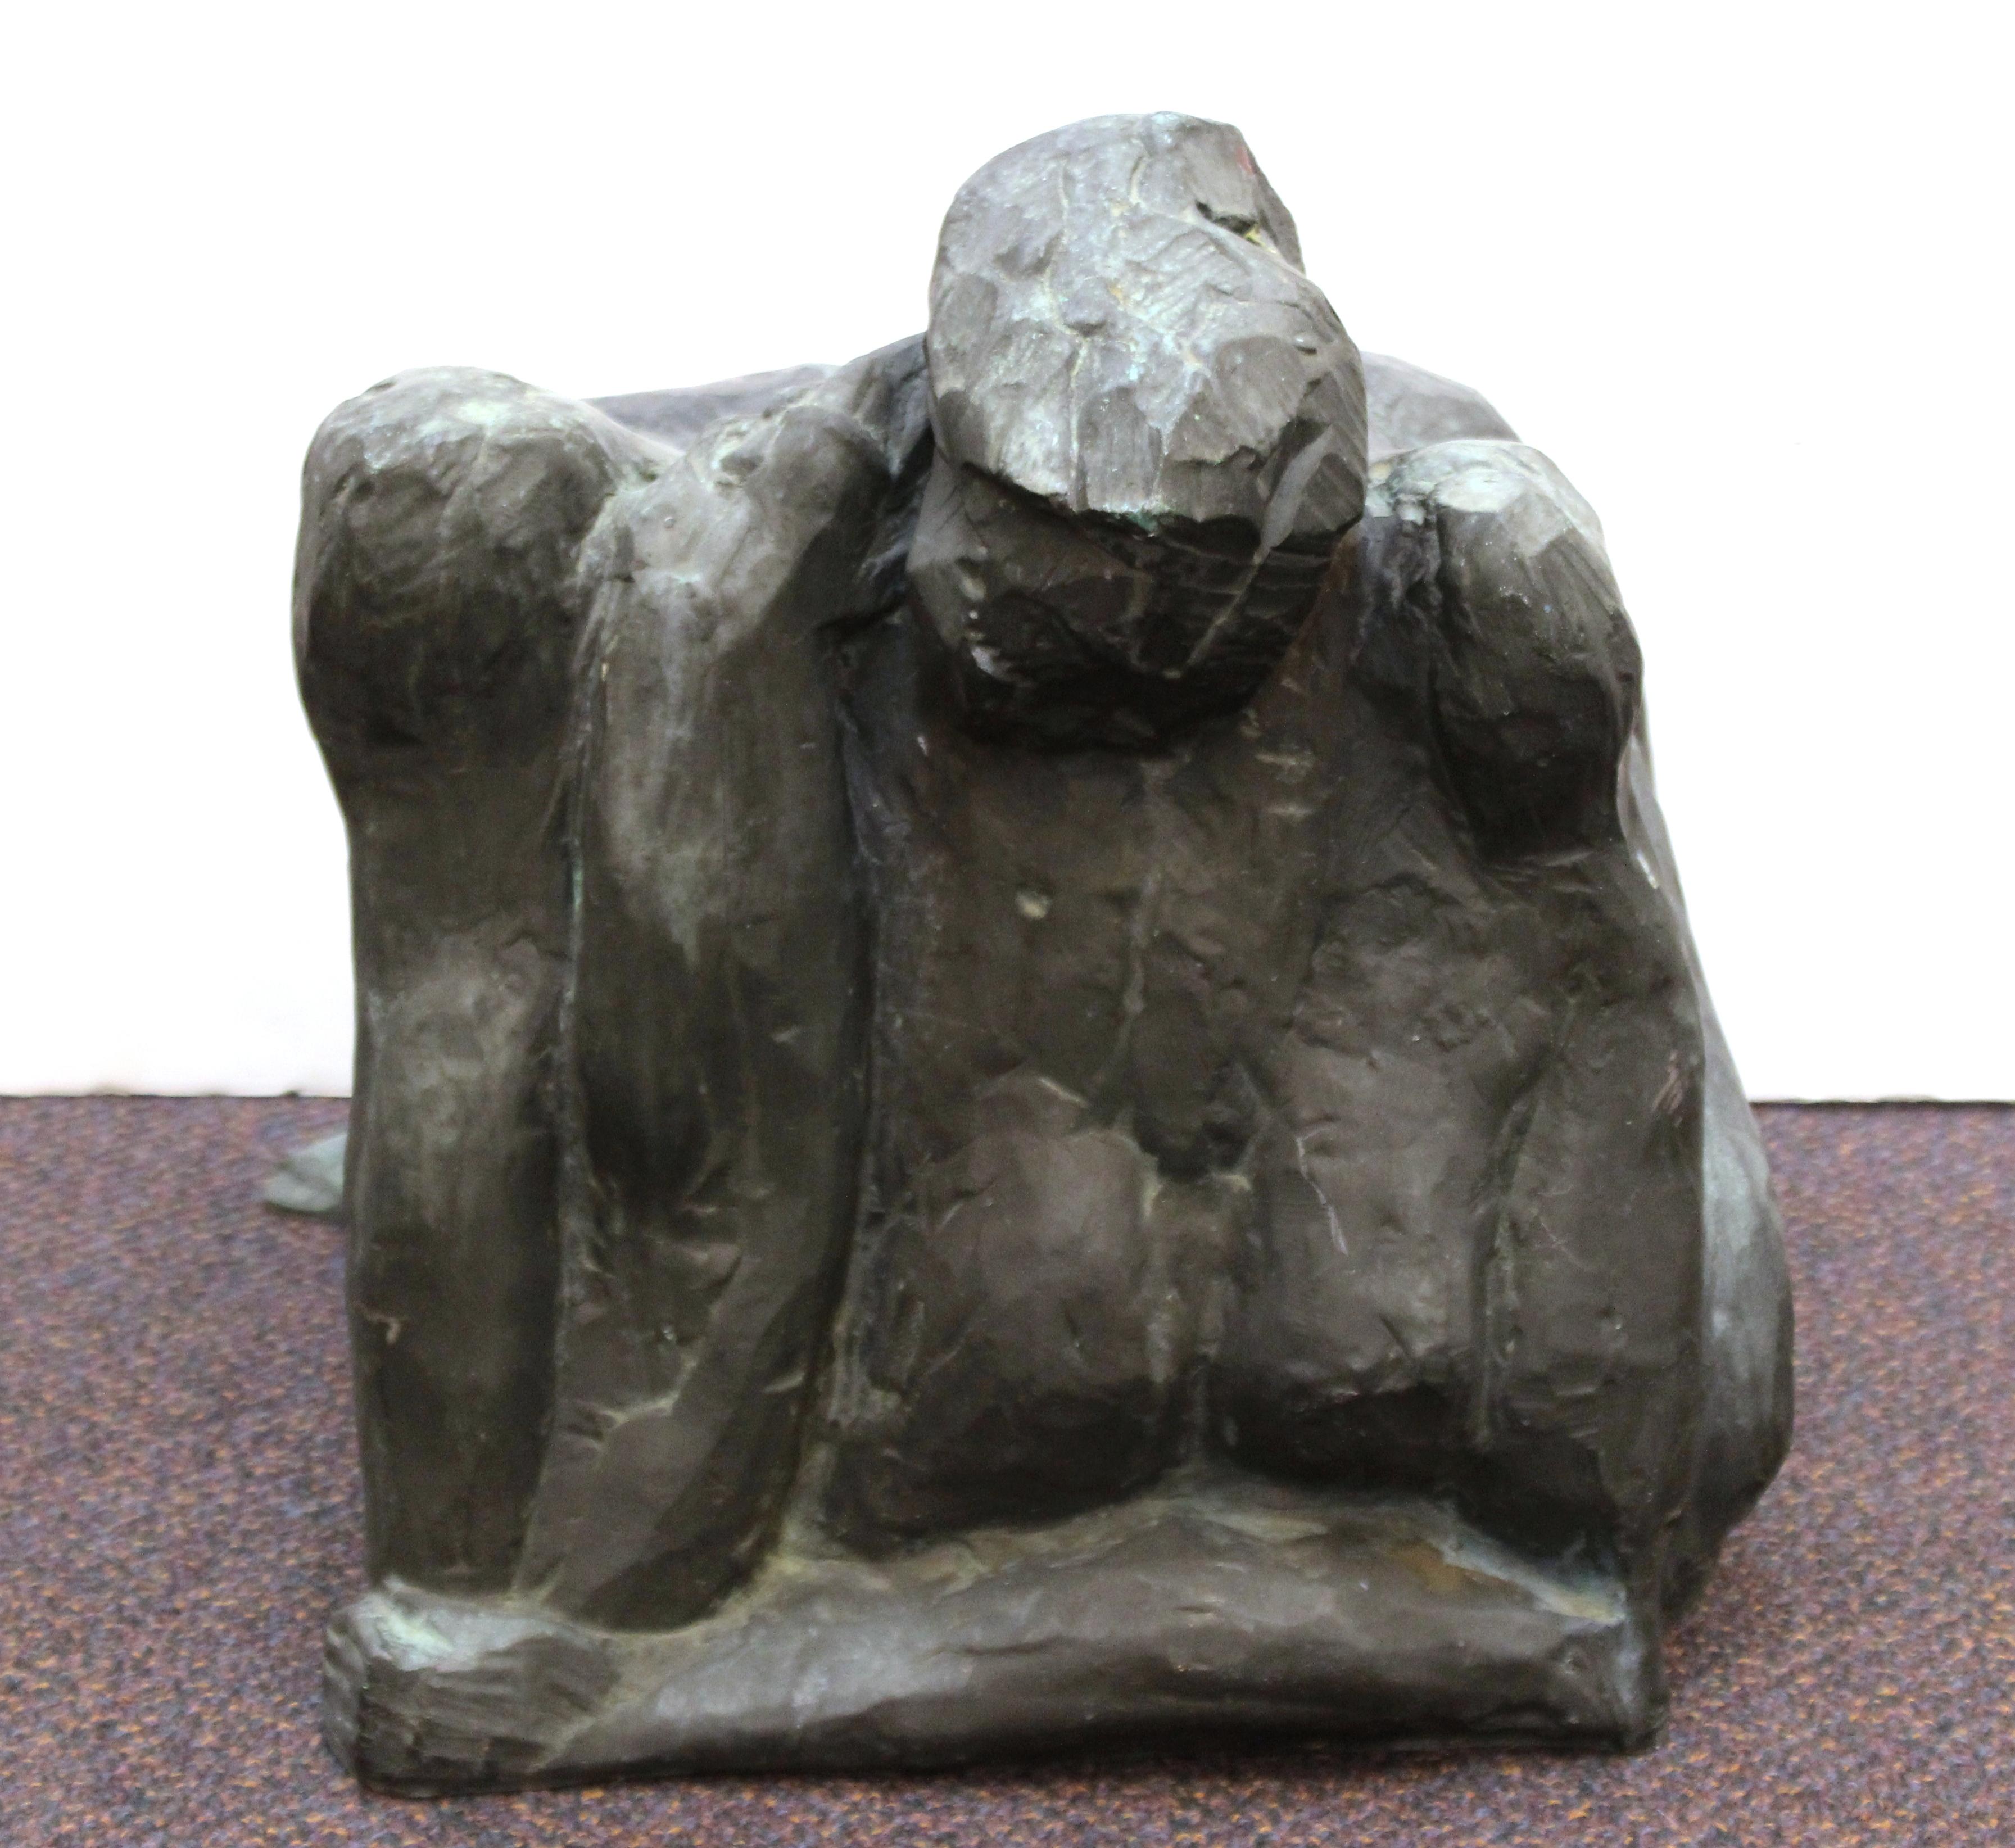 Modern abstract sculpture cast in bronze, depicting a woman crouching on the ground. The piece was made in the mid- to late 20th century and is in great vintage condition, with age-appropriate patina.